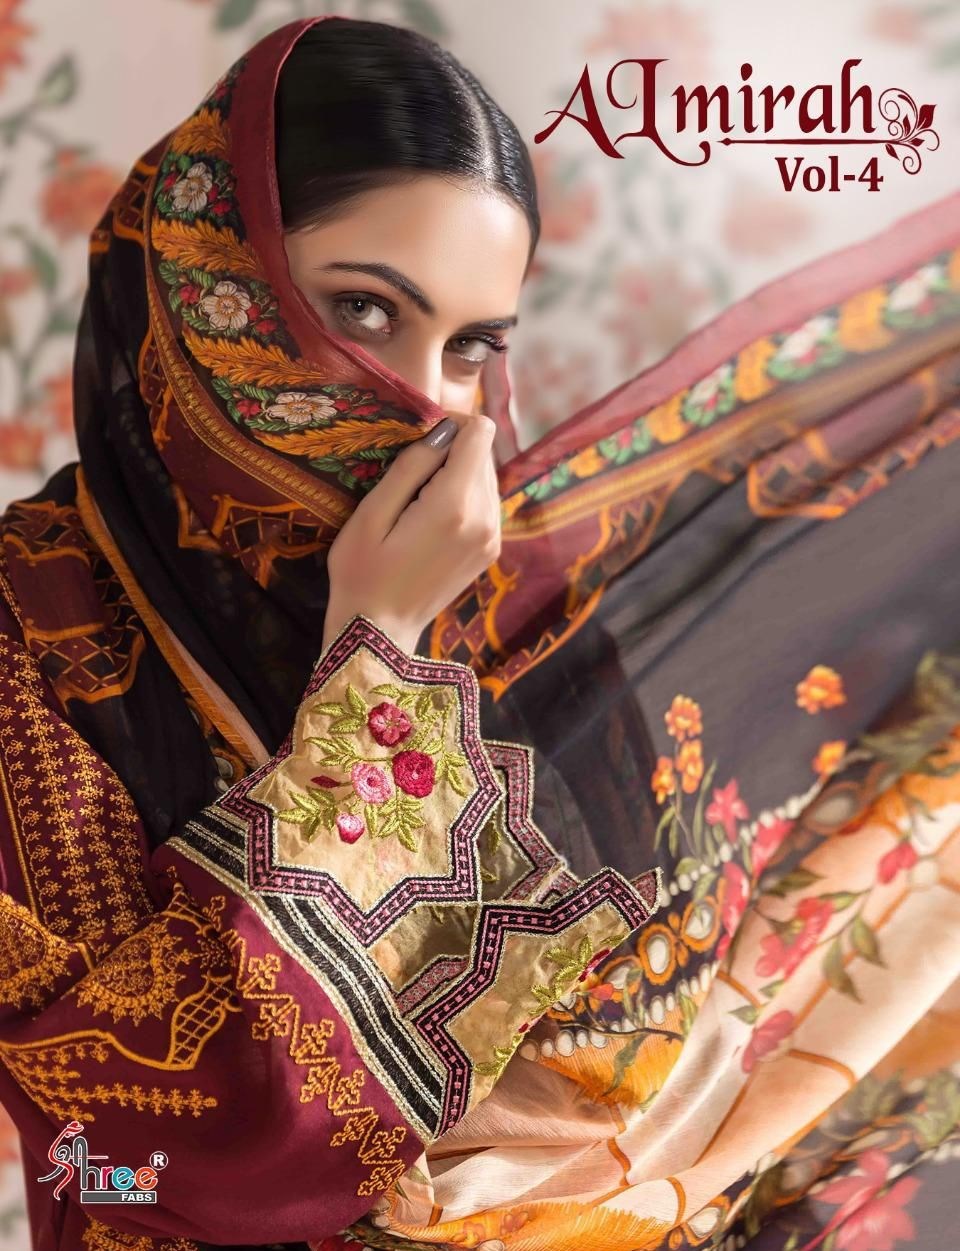 Shree Fabs Almirah Vol 4 Heavy Jam Cotton With Self Embroide...